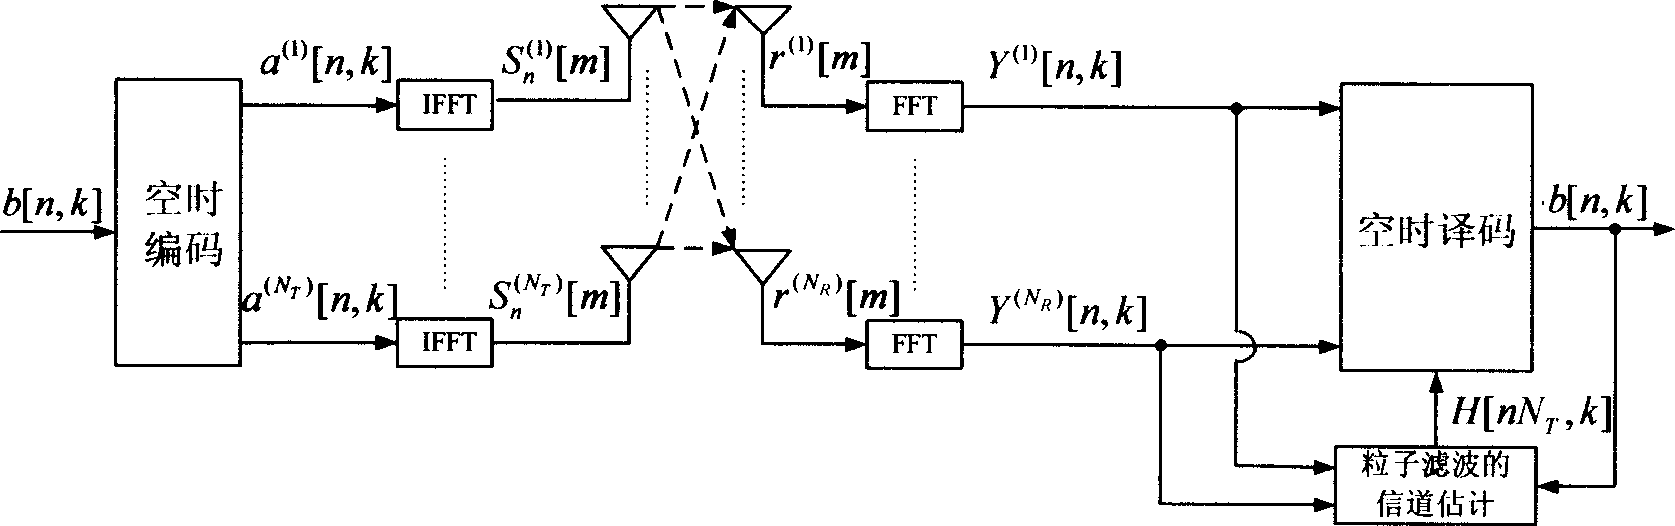 Channel estimation method based on particle filtering